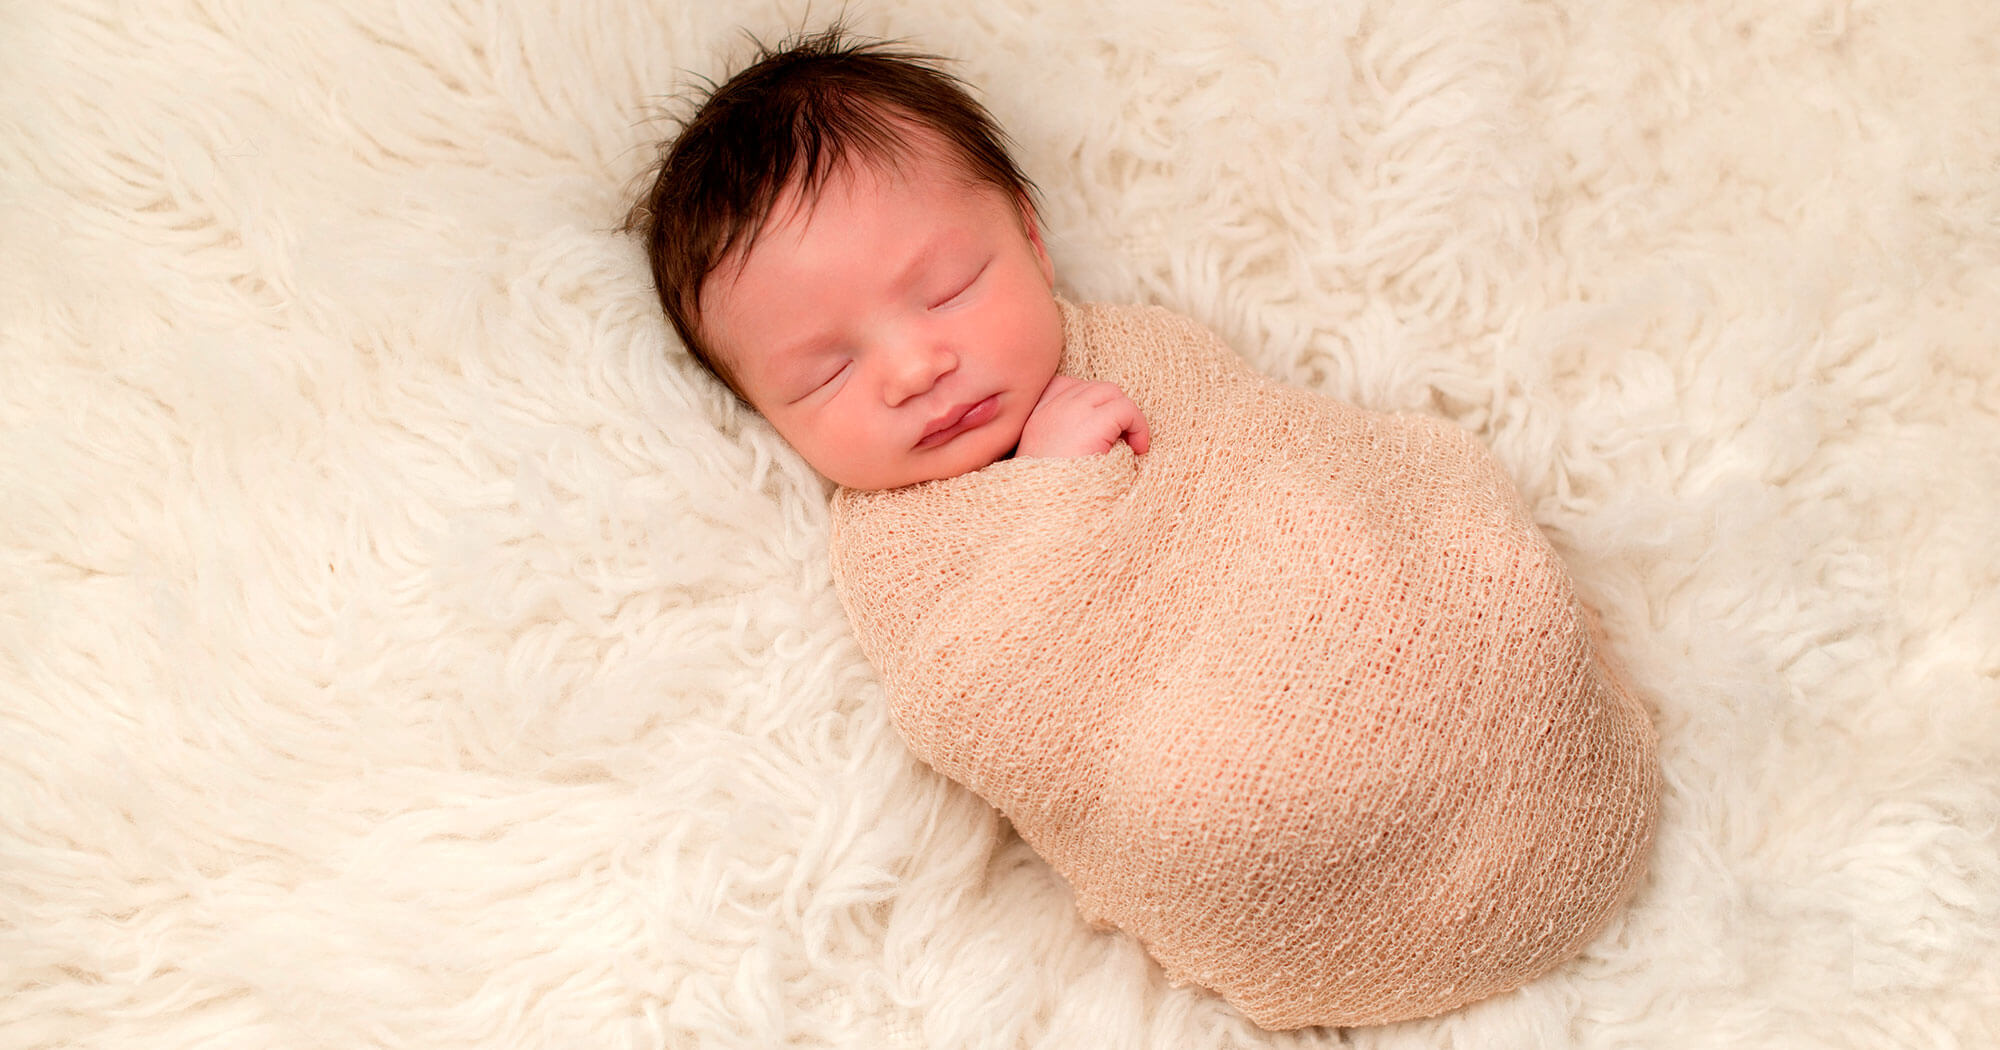 best swaddle brand